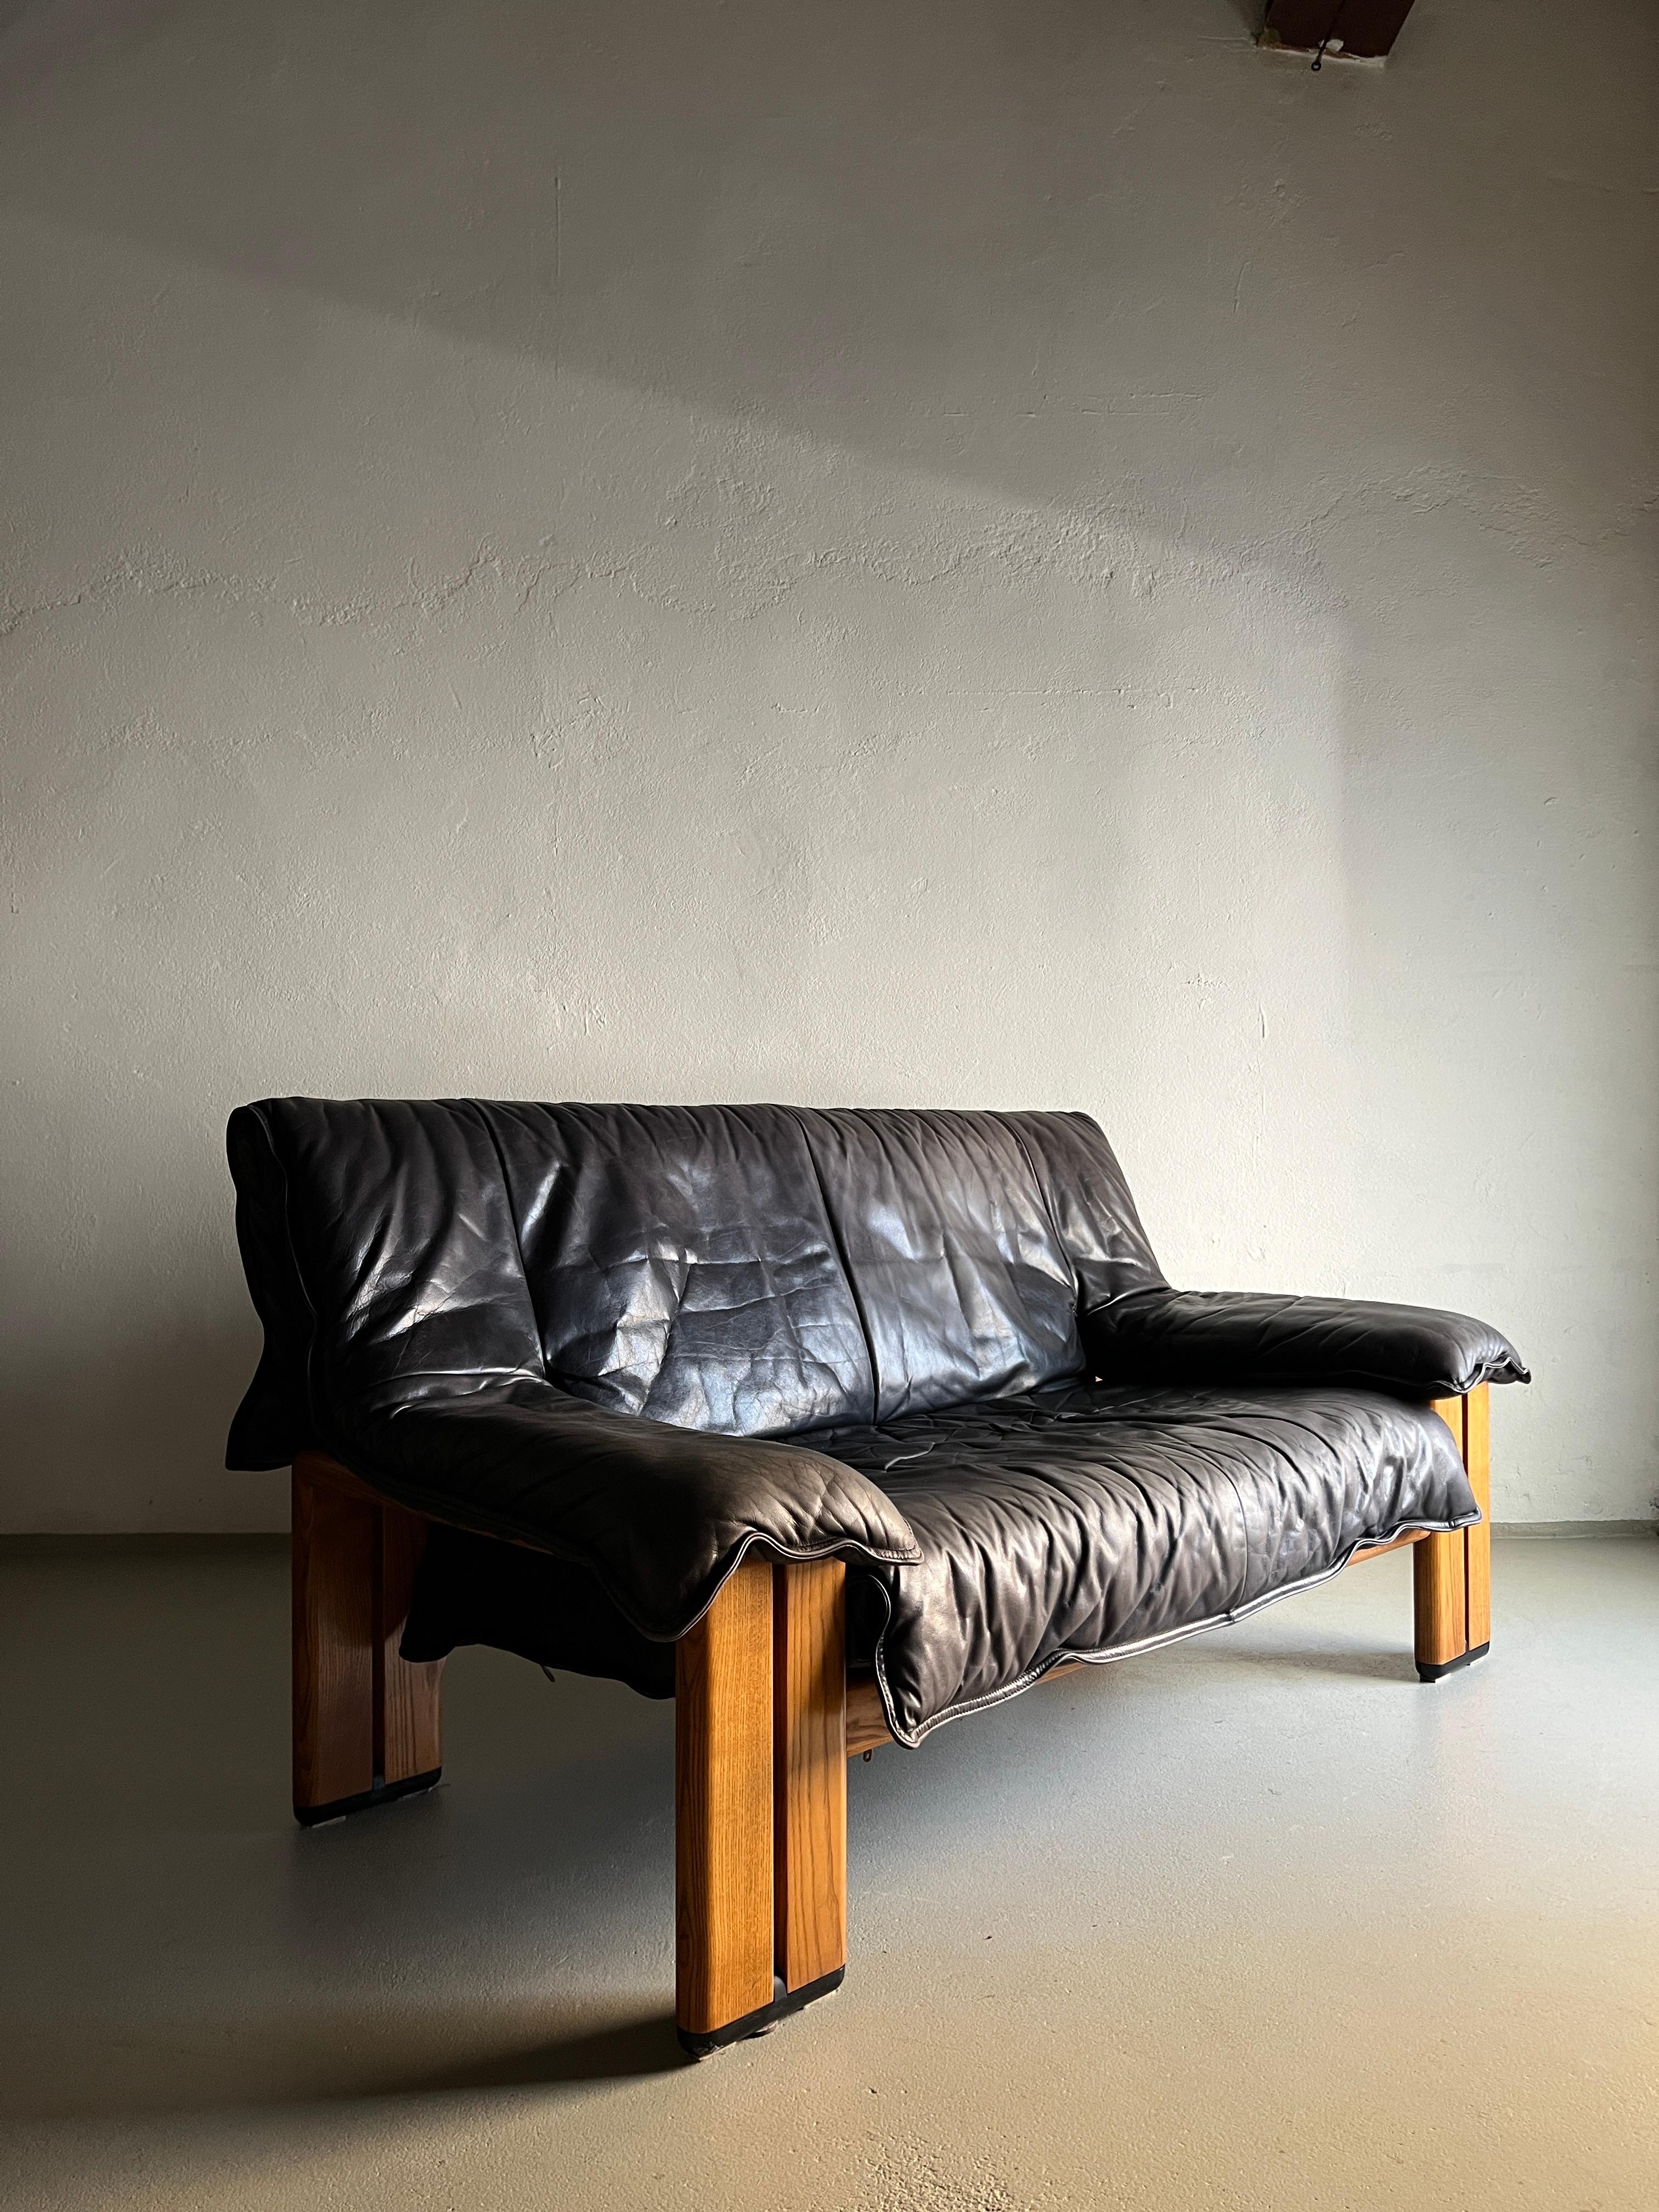 Vintage 2-seater sofa made of high-quality gray (faded black) buffalo leather with solid pine (I suppose) wood legs. Very comfortable.

Additional information:
Production period: 1990s
Dimensions: 158 W x 82 D x 80 H cm
Seat: 38 H cm
Condition: good